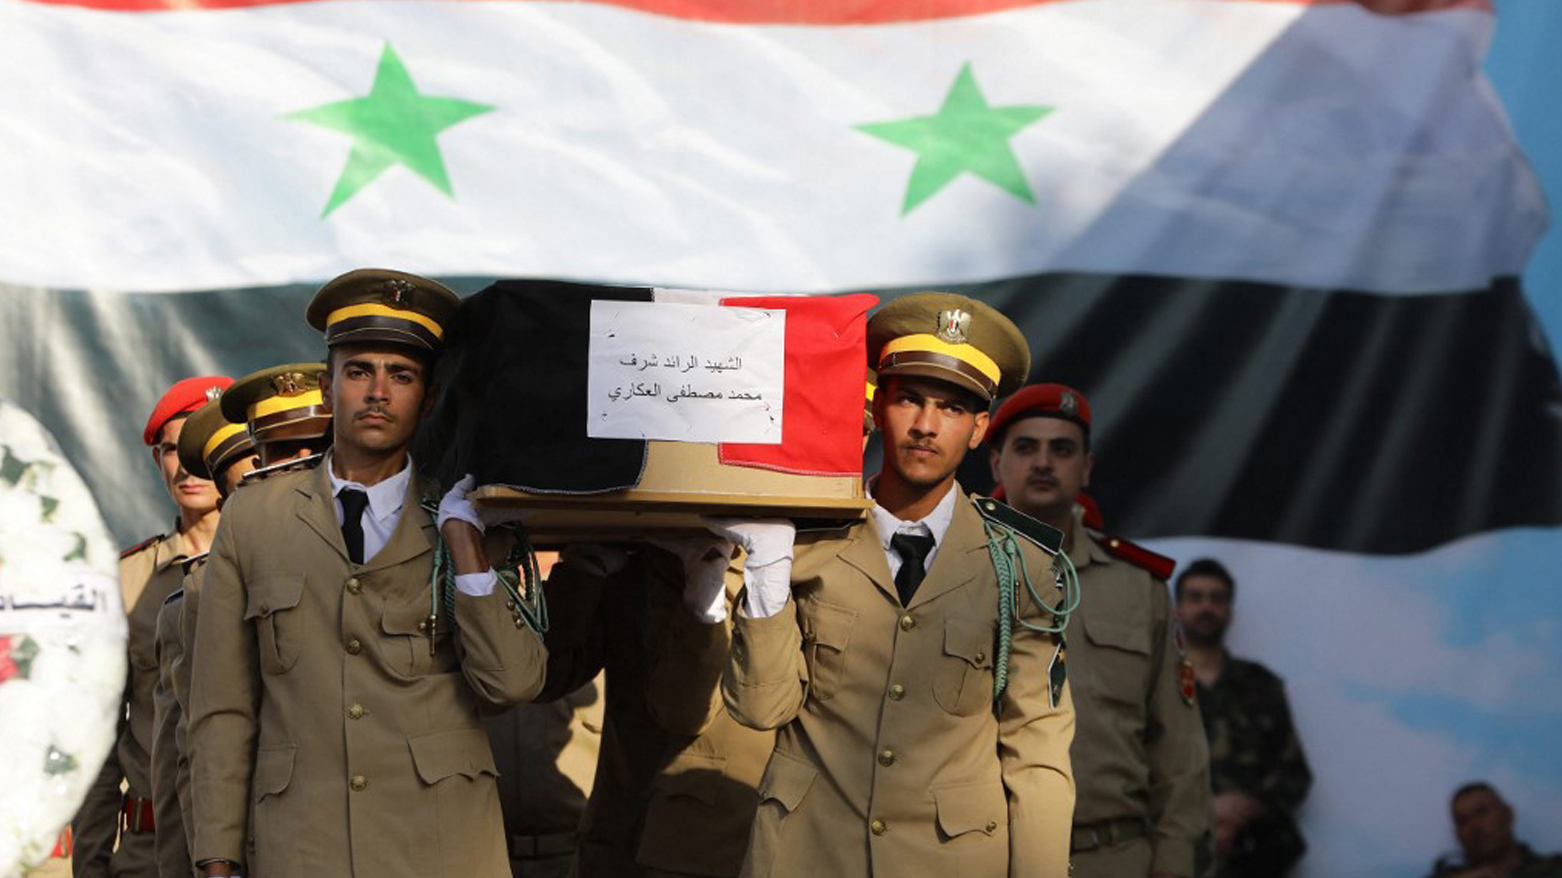 Syrian soldiers carry a casket during the funeral of the victims of a drone attack targeting a Syrian military academy, outside a hospital in government-controlled Homs, Oct. 6, 2023. (Photo: Louai Beshara/AFP)